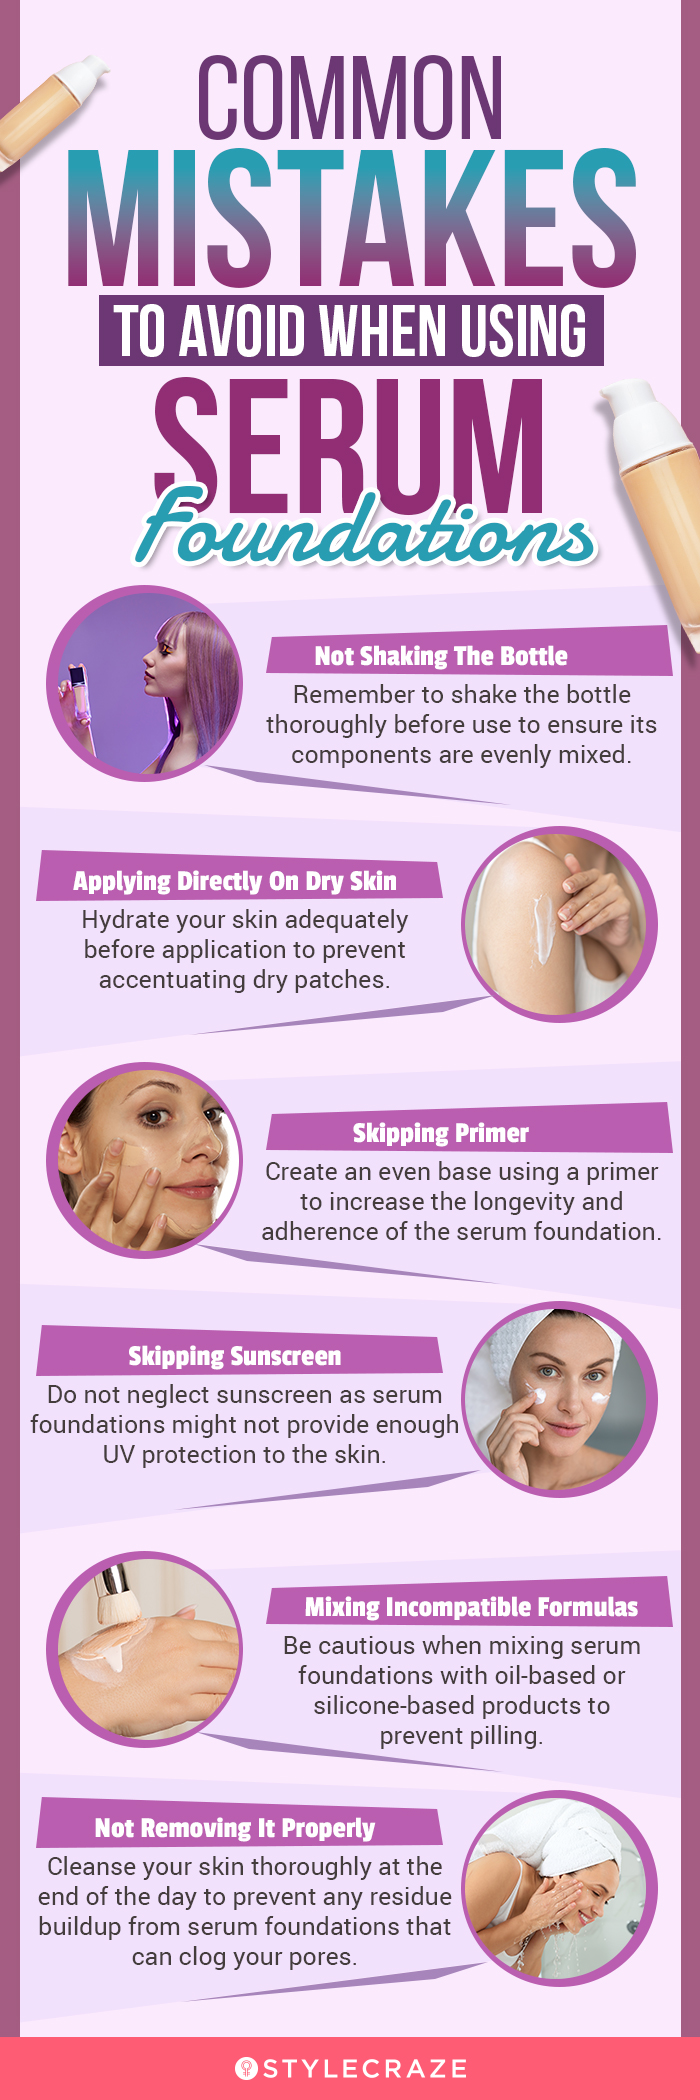 Common Mistakes To Avoid When Using Serum Foundations (infographic)